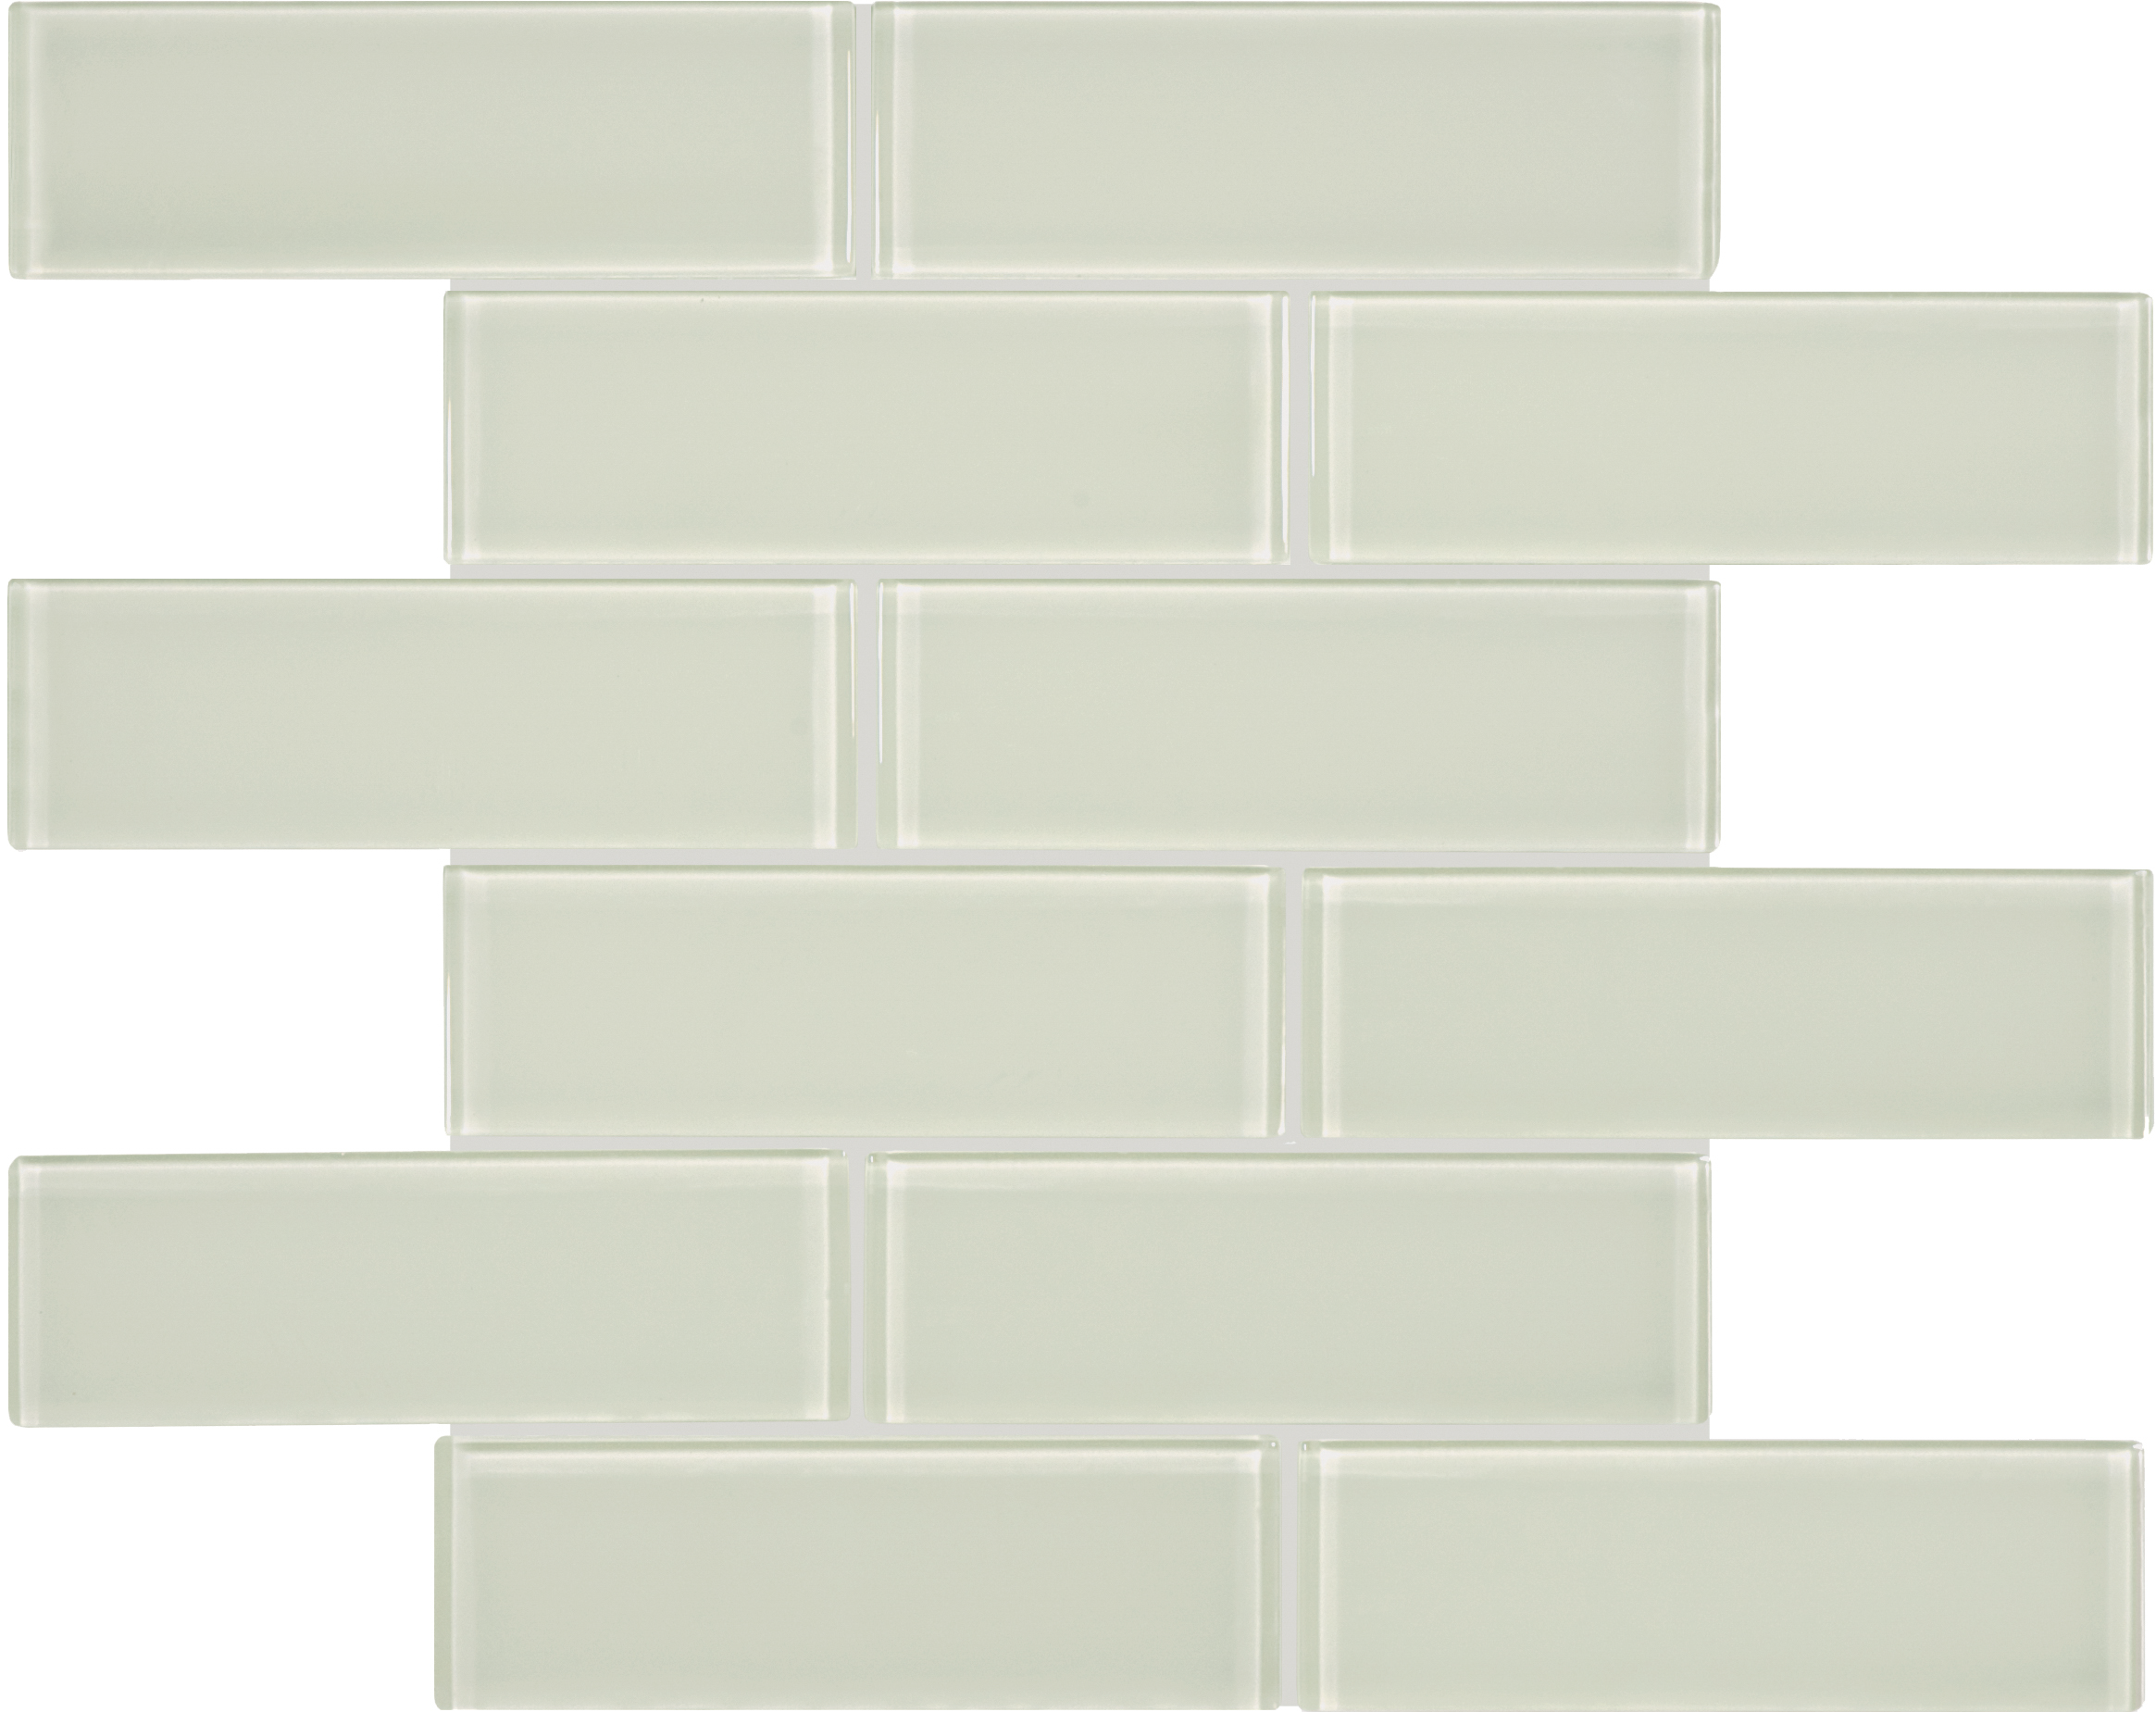 sand brick offset 2x6-inch pattern fused glass mosaic from element anatolia collection distributed by surface group international glossy finish rounded edge mesh shape